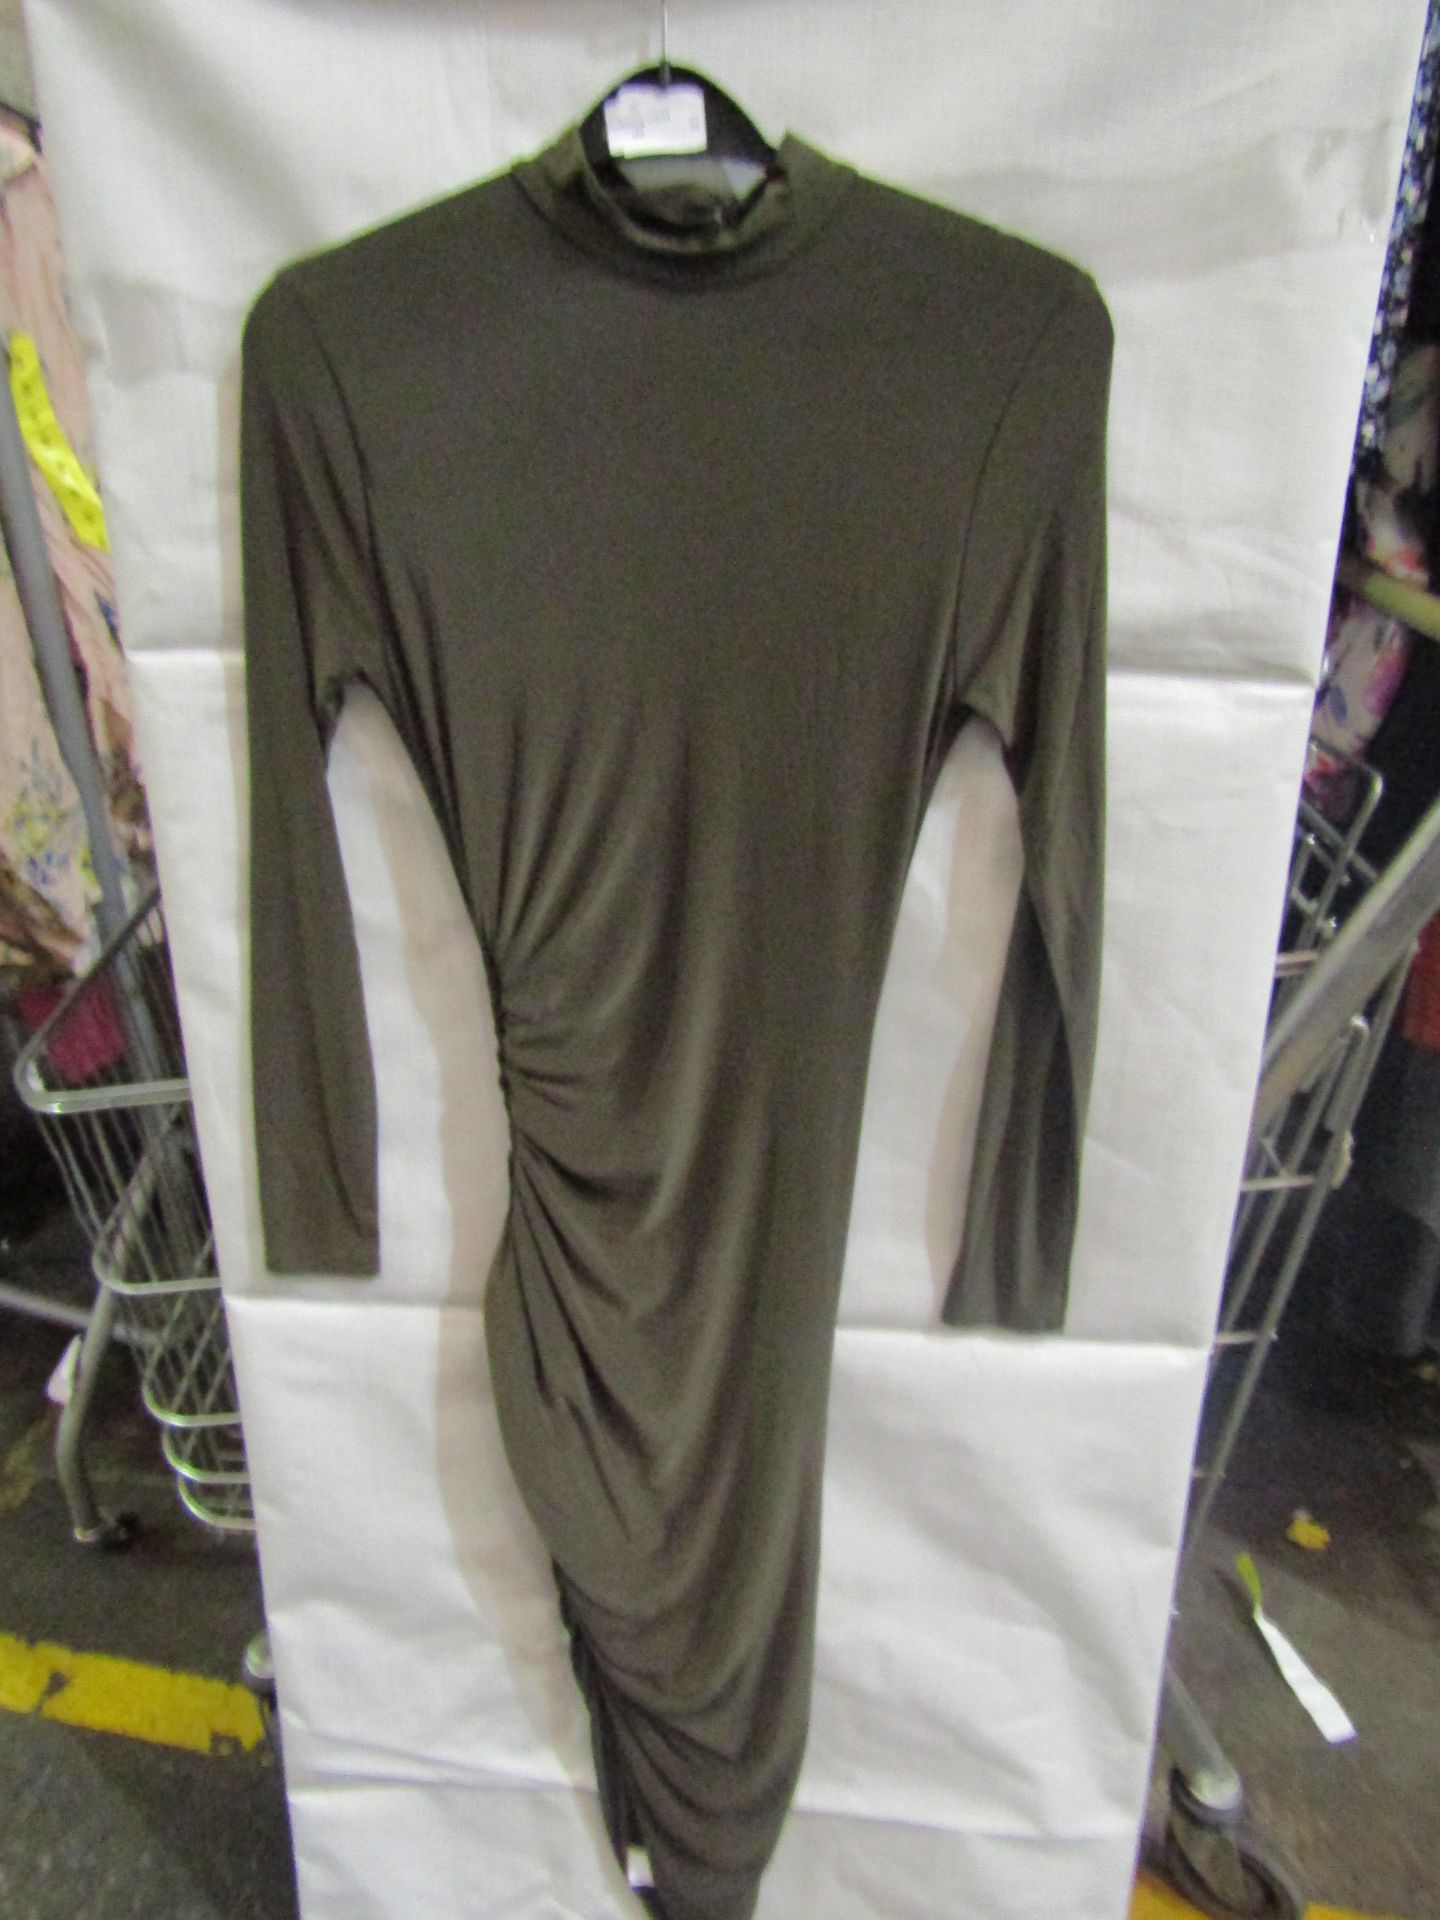 2x Miss Guided - Slinky Rucked Midi Khaki Dress - Size 22 Uk - New With Tags & Packaged. - Image 2 of 2